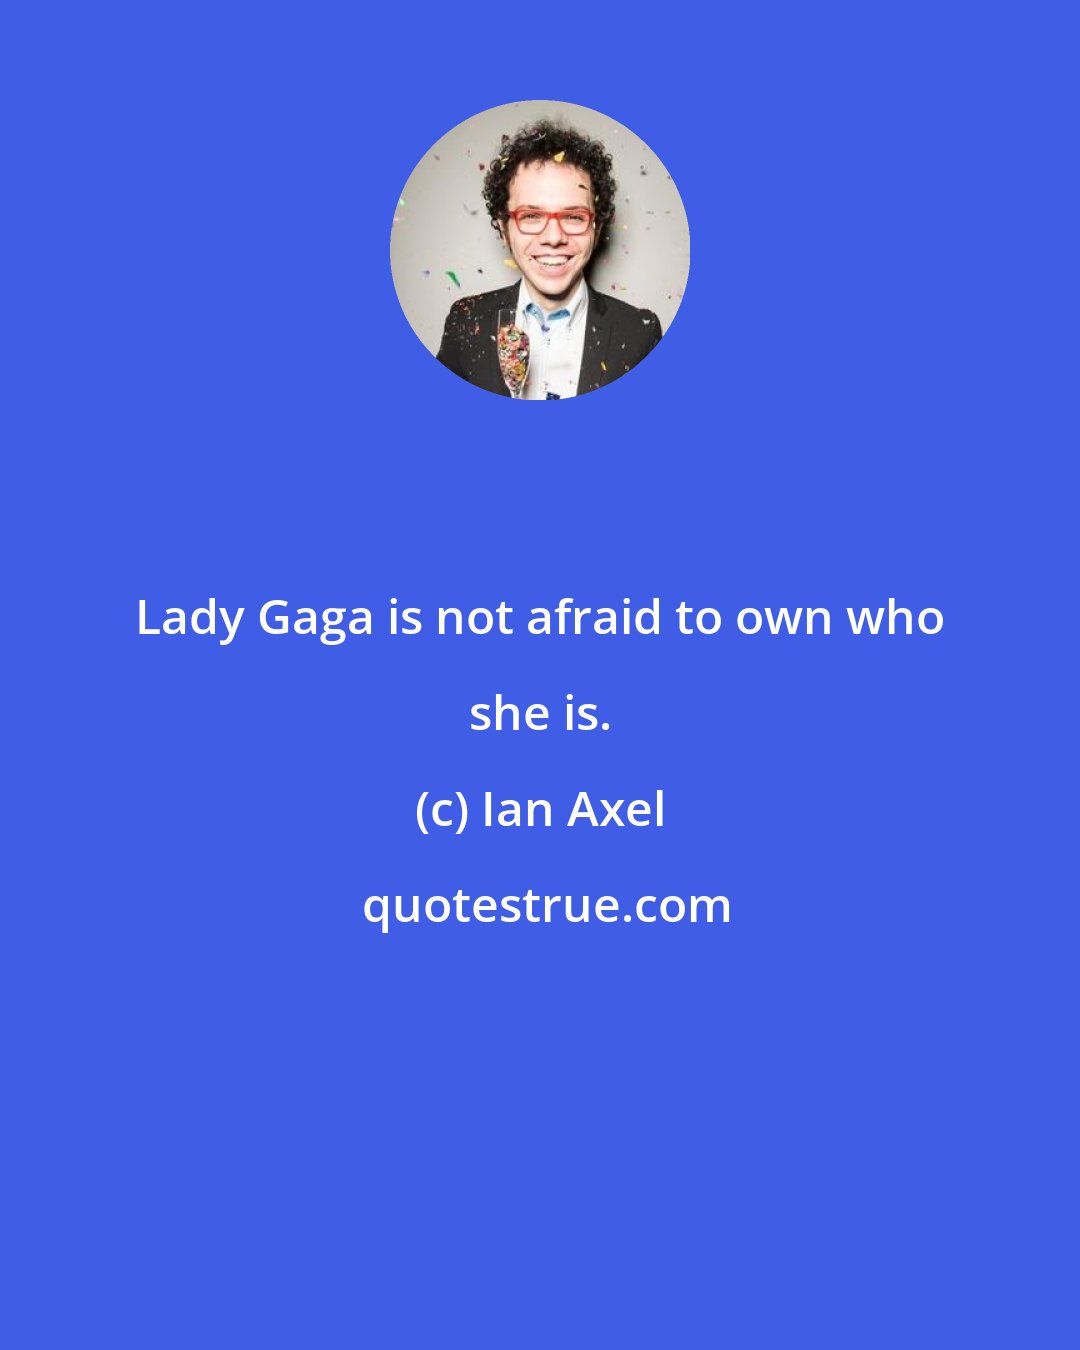 Ian Axel: Lady Gaga is not afraid to own who she is.